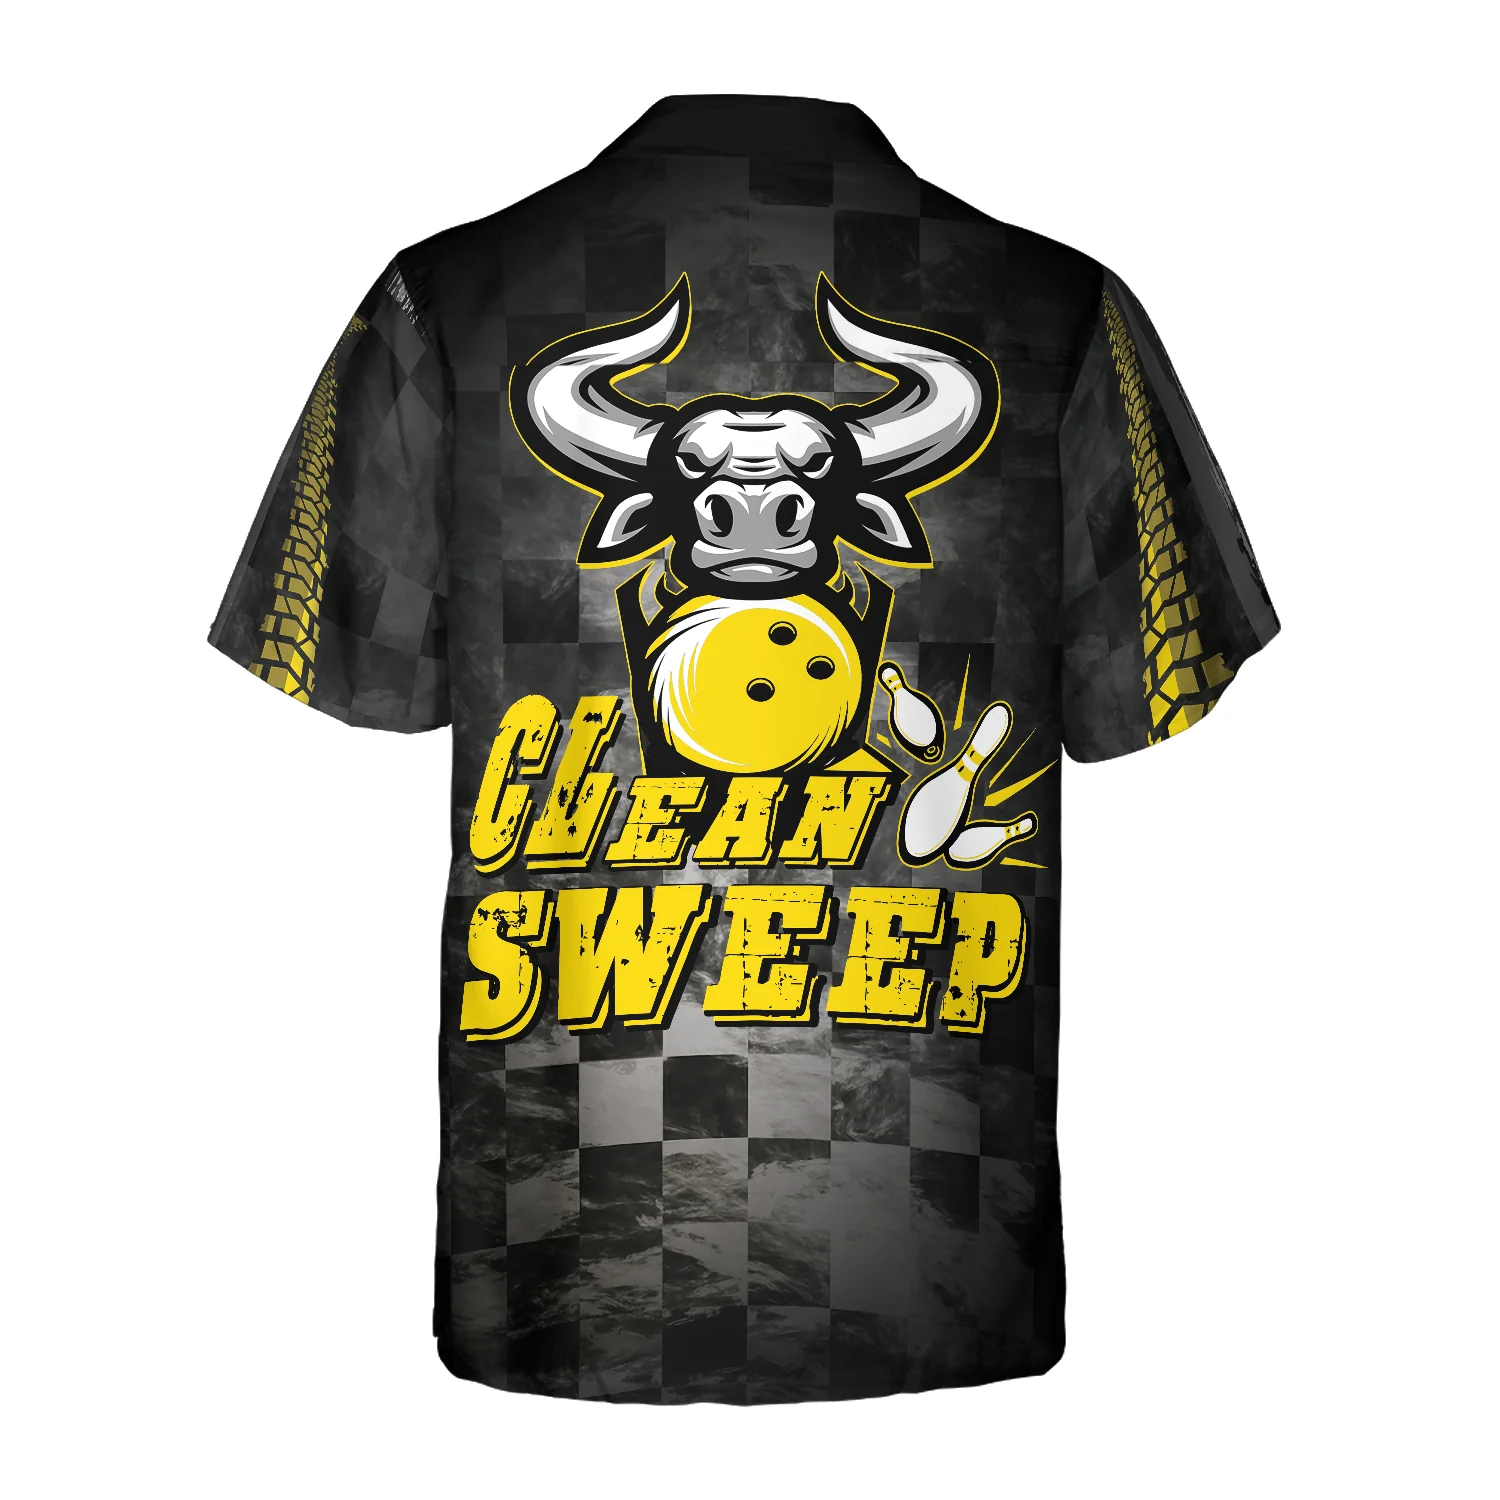 Clean Sweep Bowling Bull Aloha Hawaiian Shirt For Summer/ Colorful Shirt For Men Women/ Perfect Gift For Friend/ Team/ Family/ Bowling Lovers